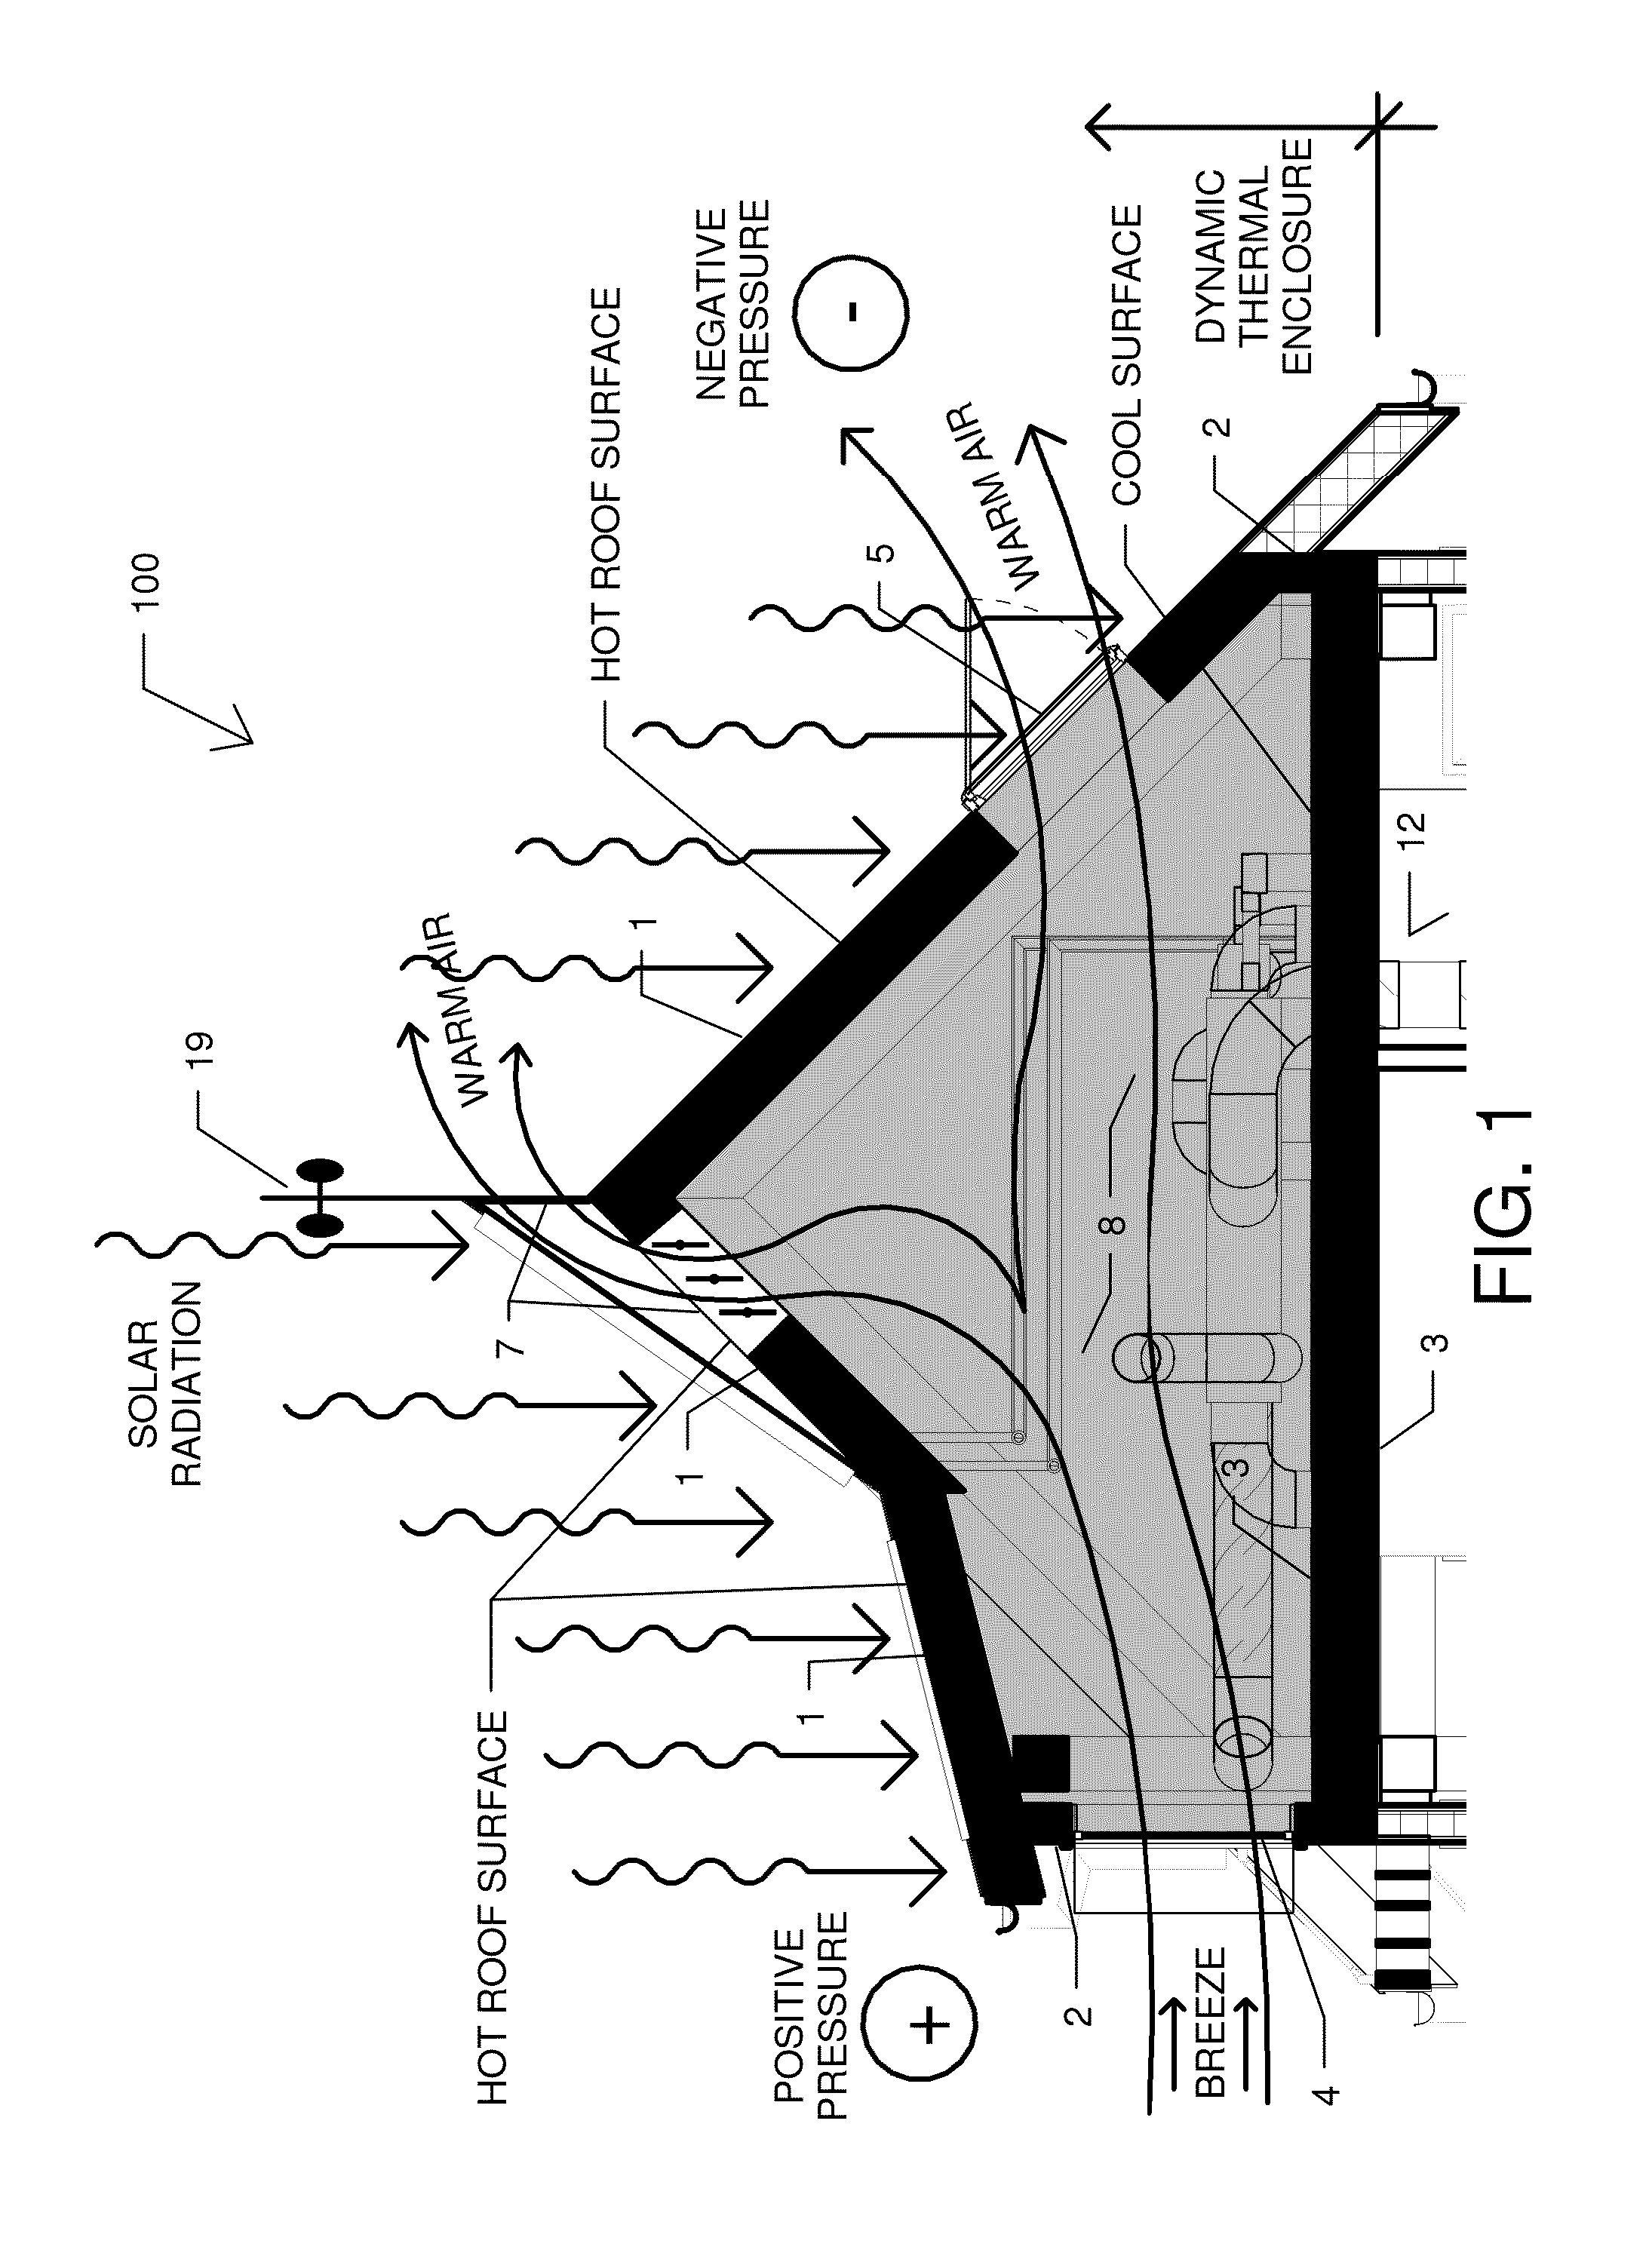 Energy-efficient building structure having a dynamic thermal enclosure